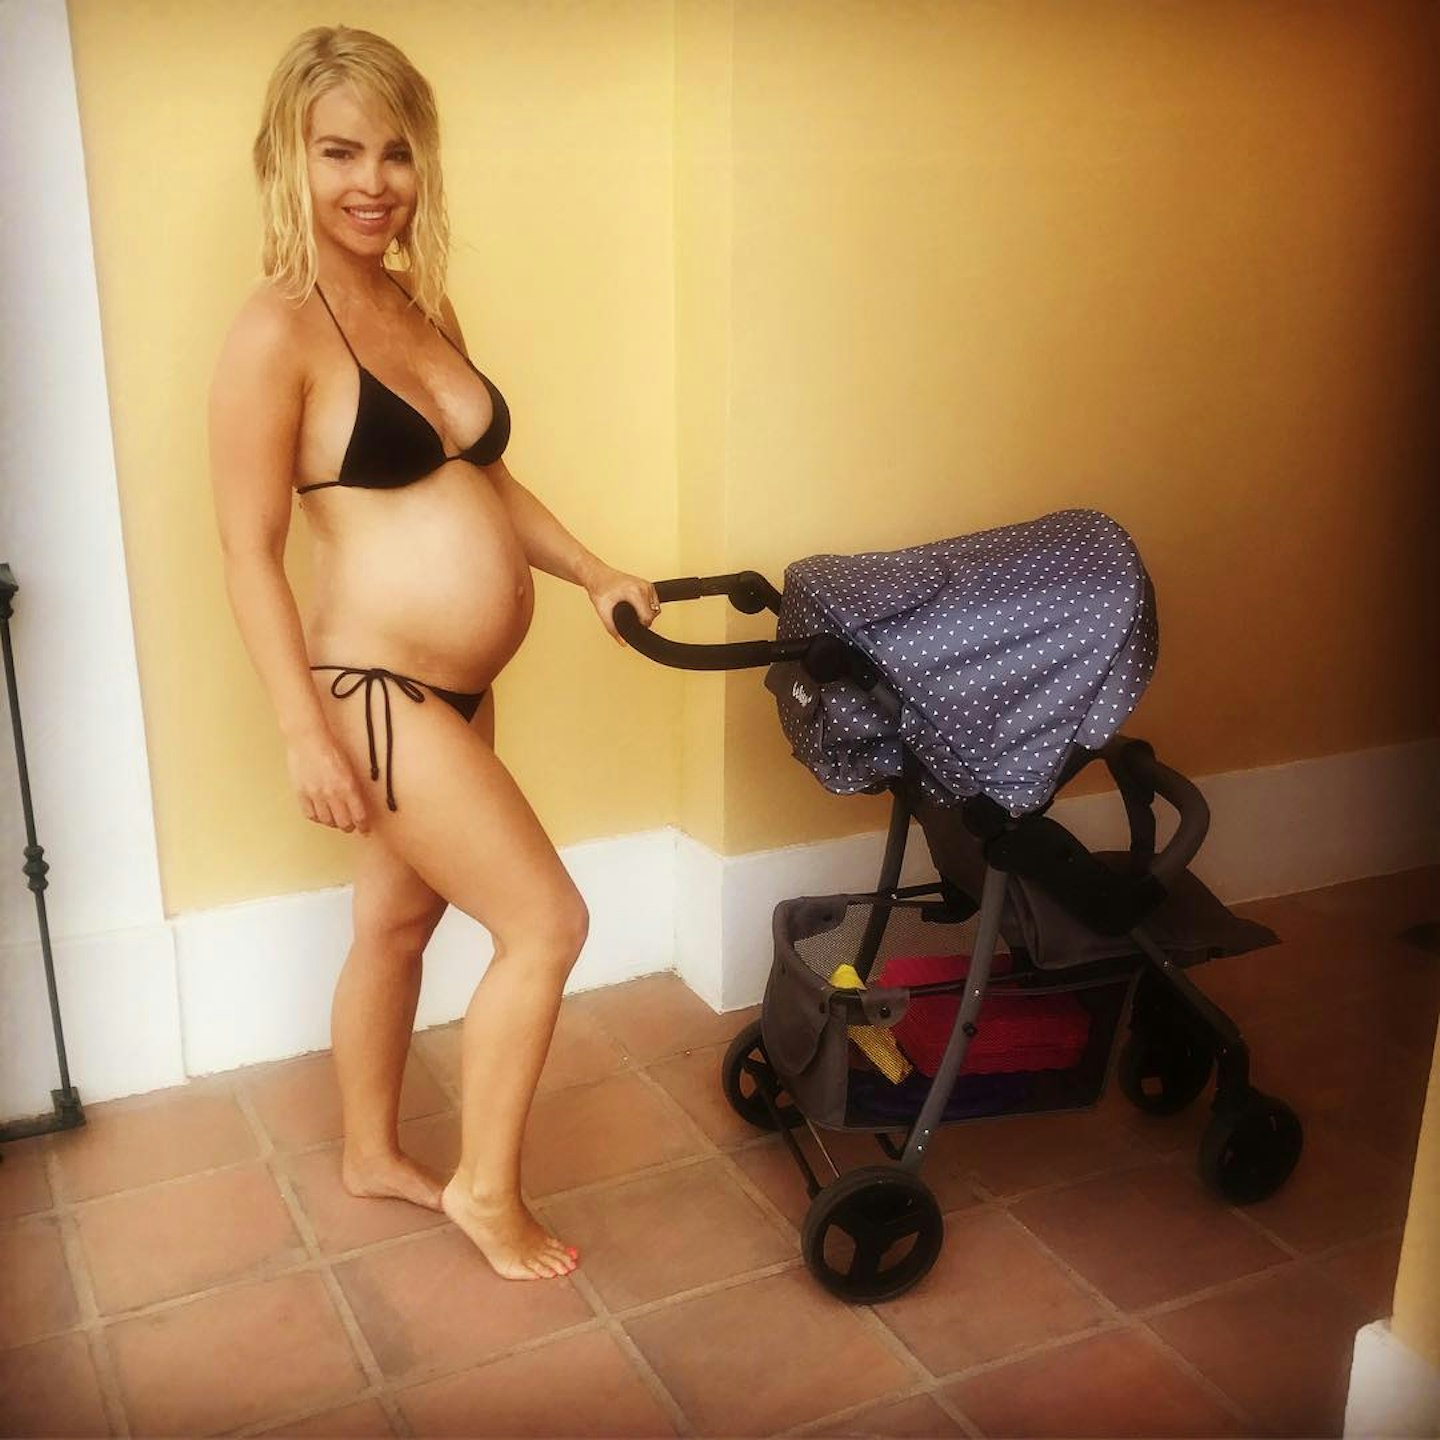 katie-piper-forced-caesarean-second-pregnancy-scarring